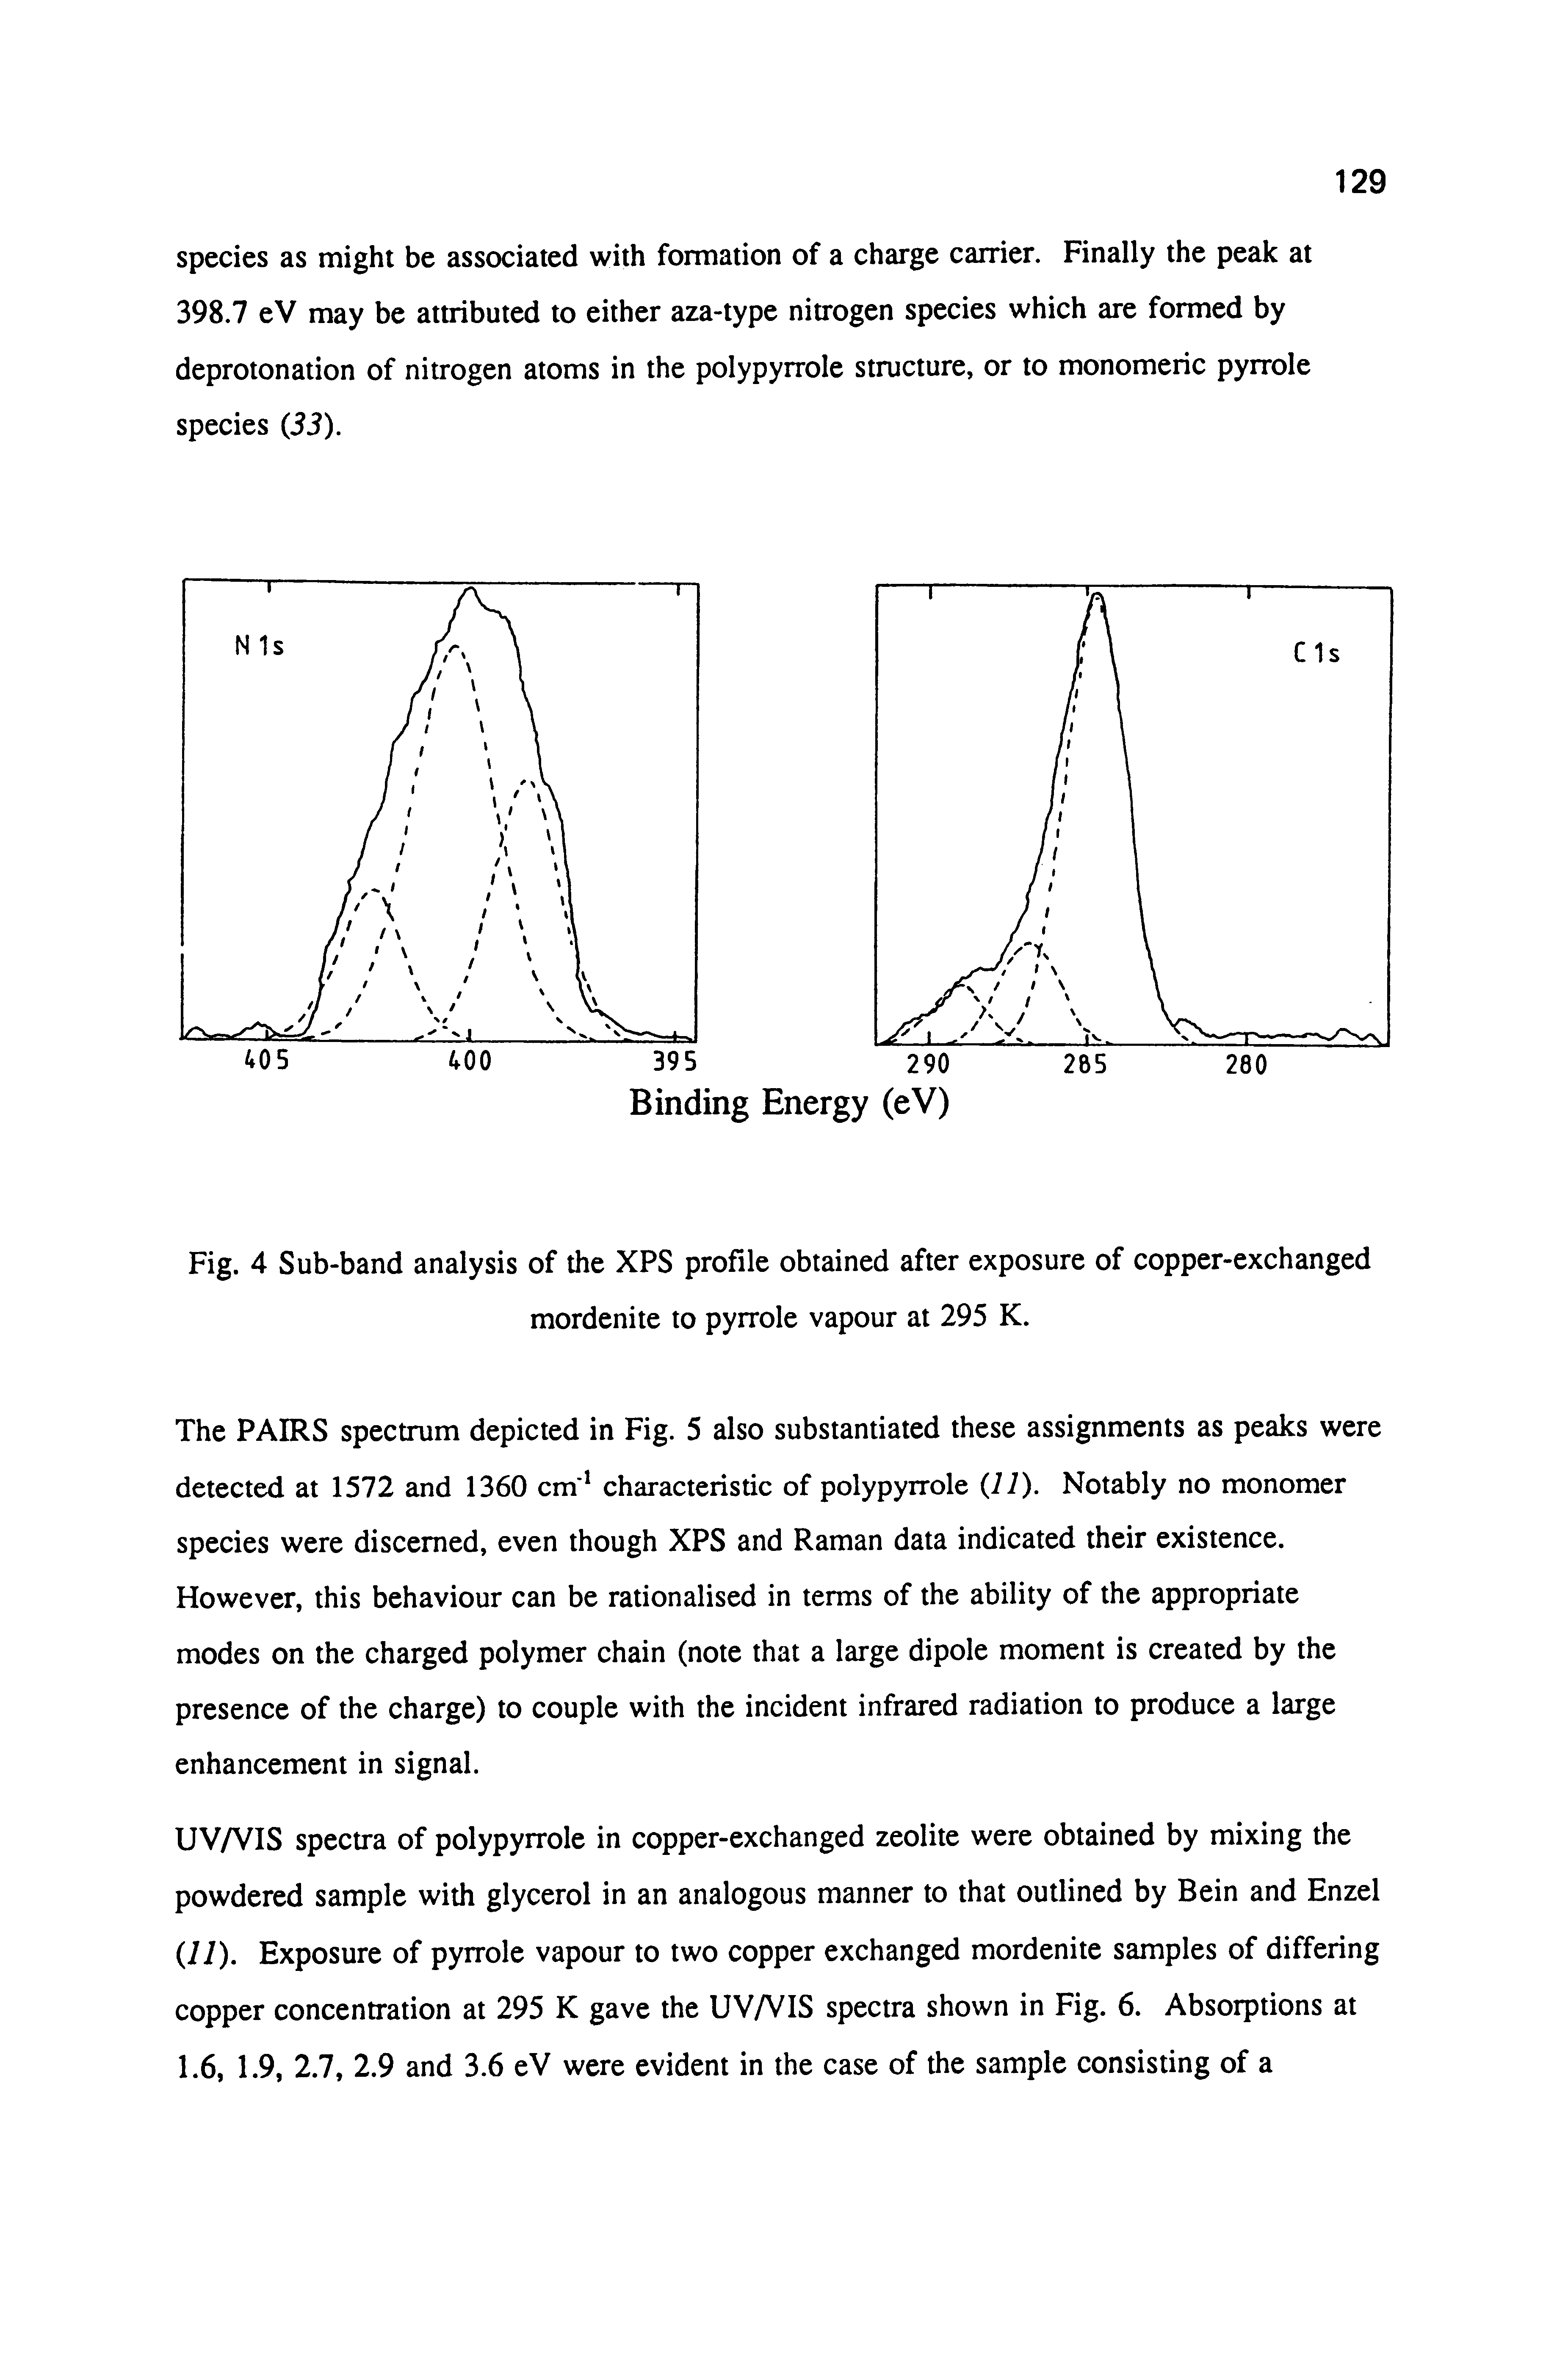 Fig. 4 Sub-band analysis of the XPS profile obtained after exposure of copper-exchanged mordenite to pyrrole vapour at 295 K.